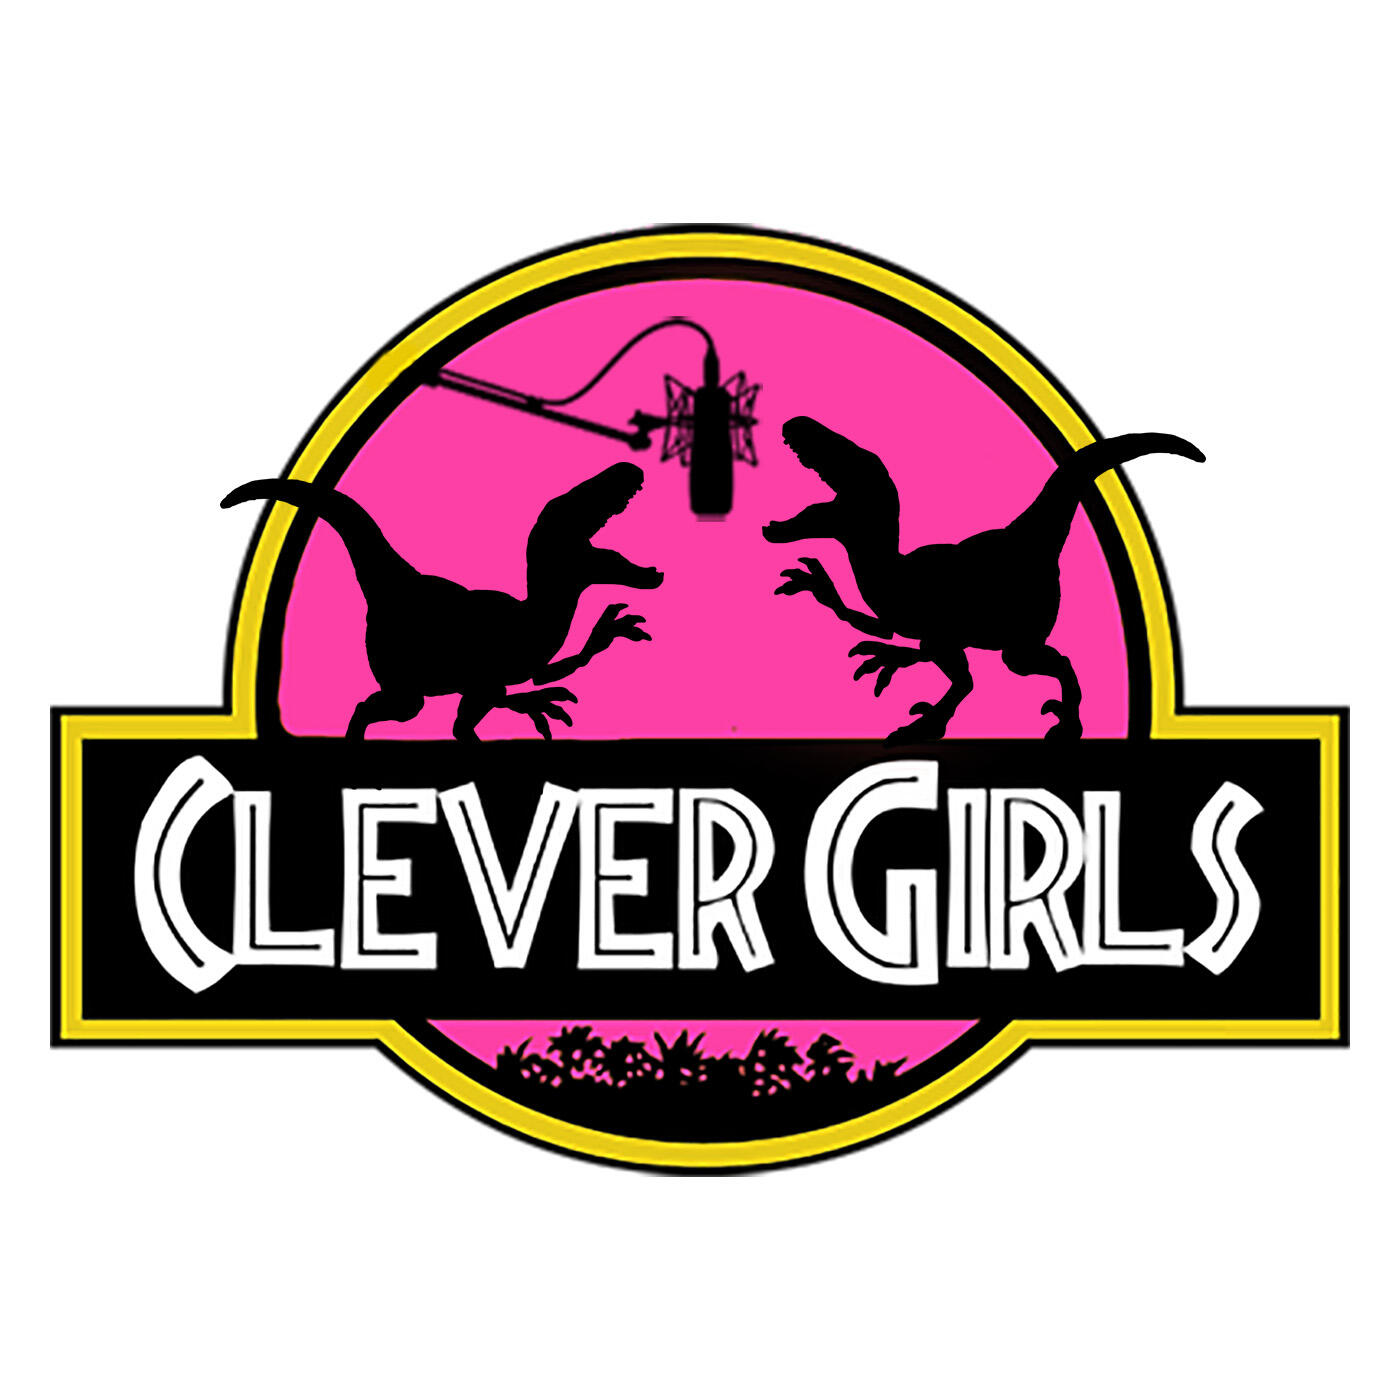 She s clever. Clever girl. Clever girl группа. Logo for Clever girls Team. Таблички для Clever girls.